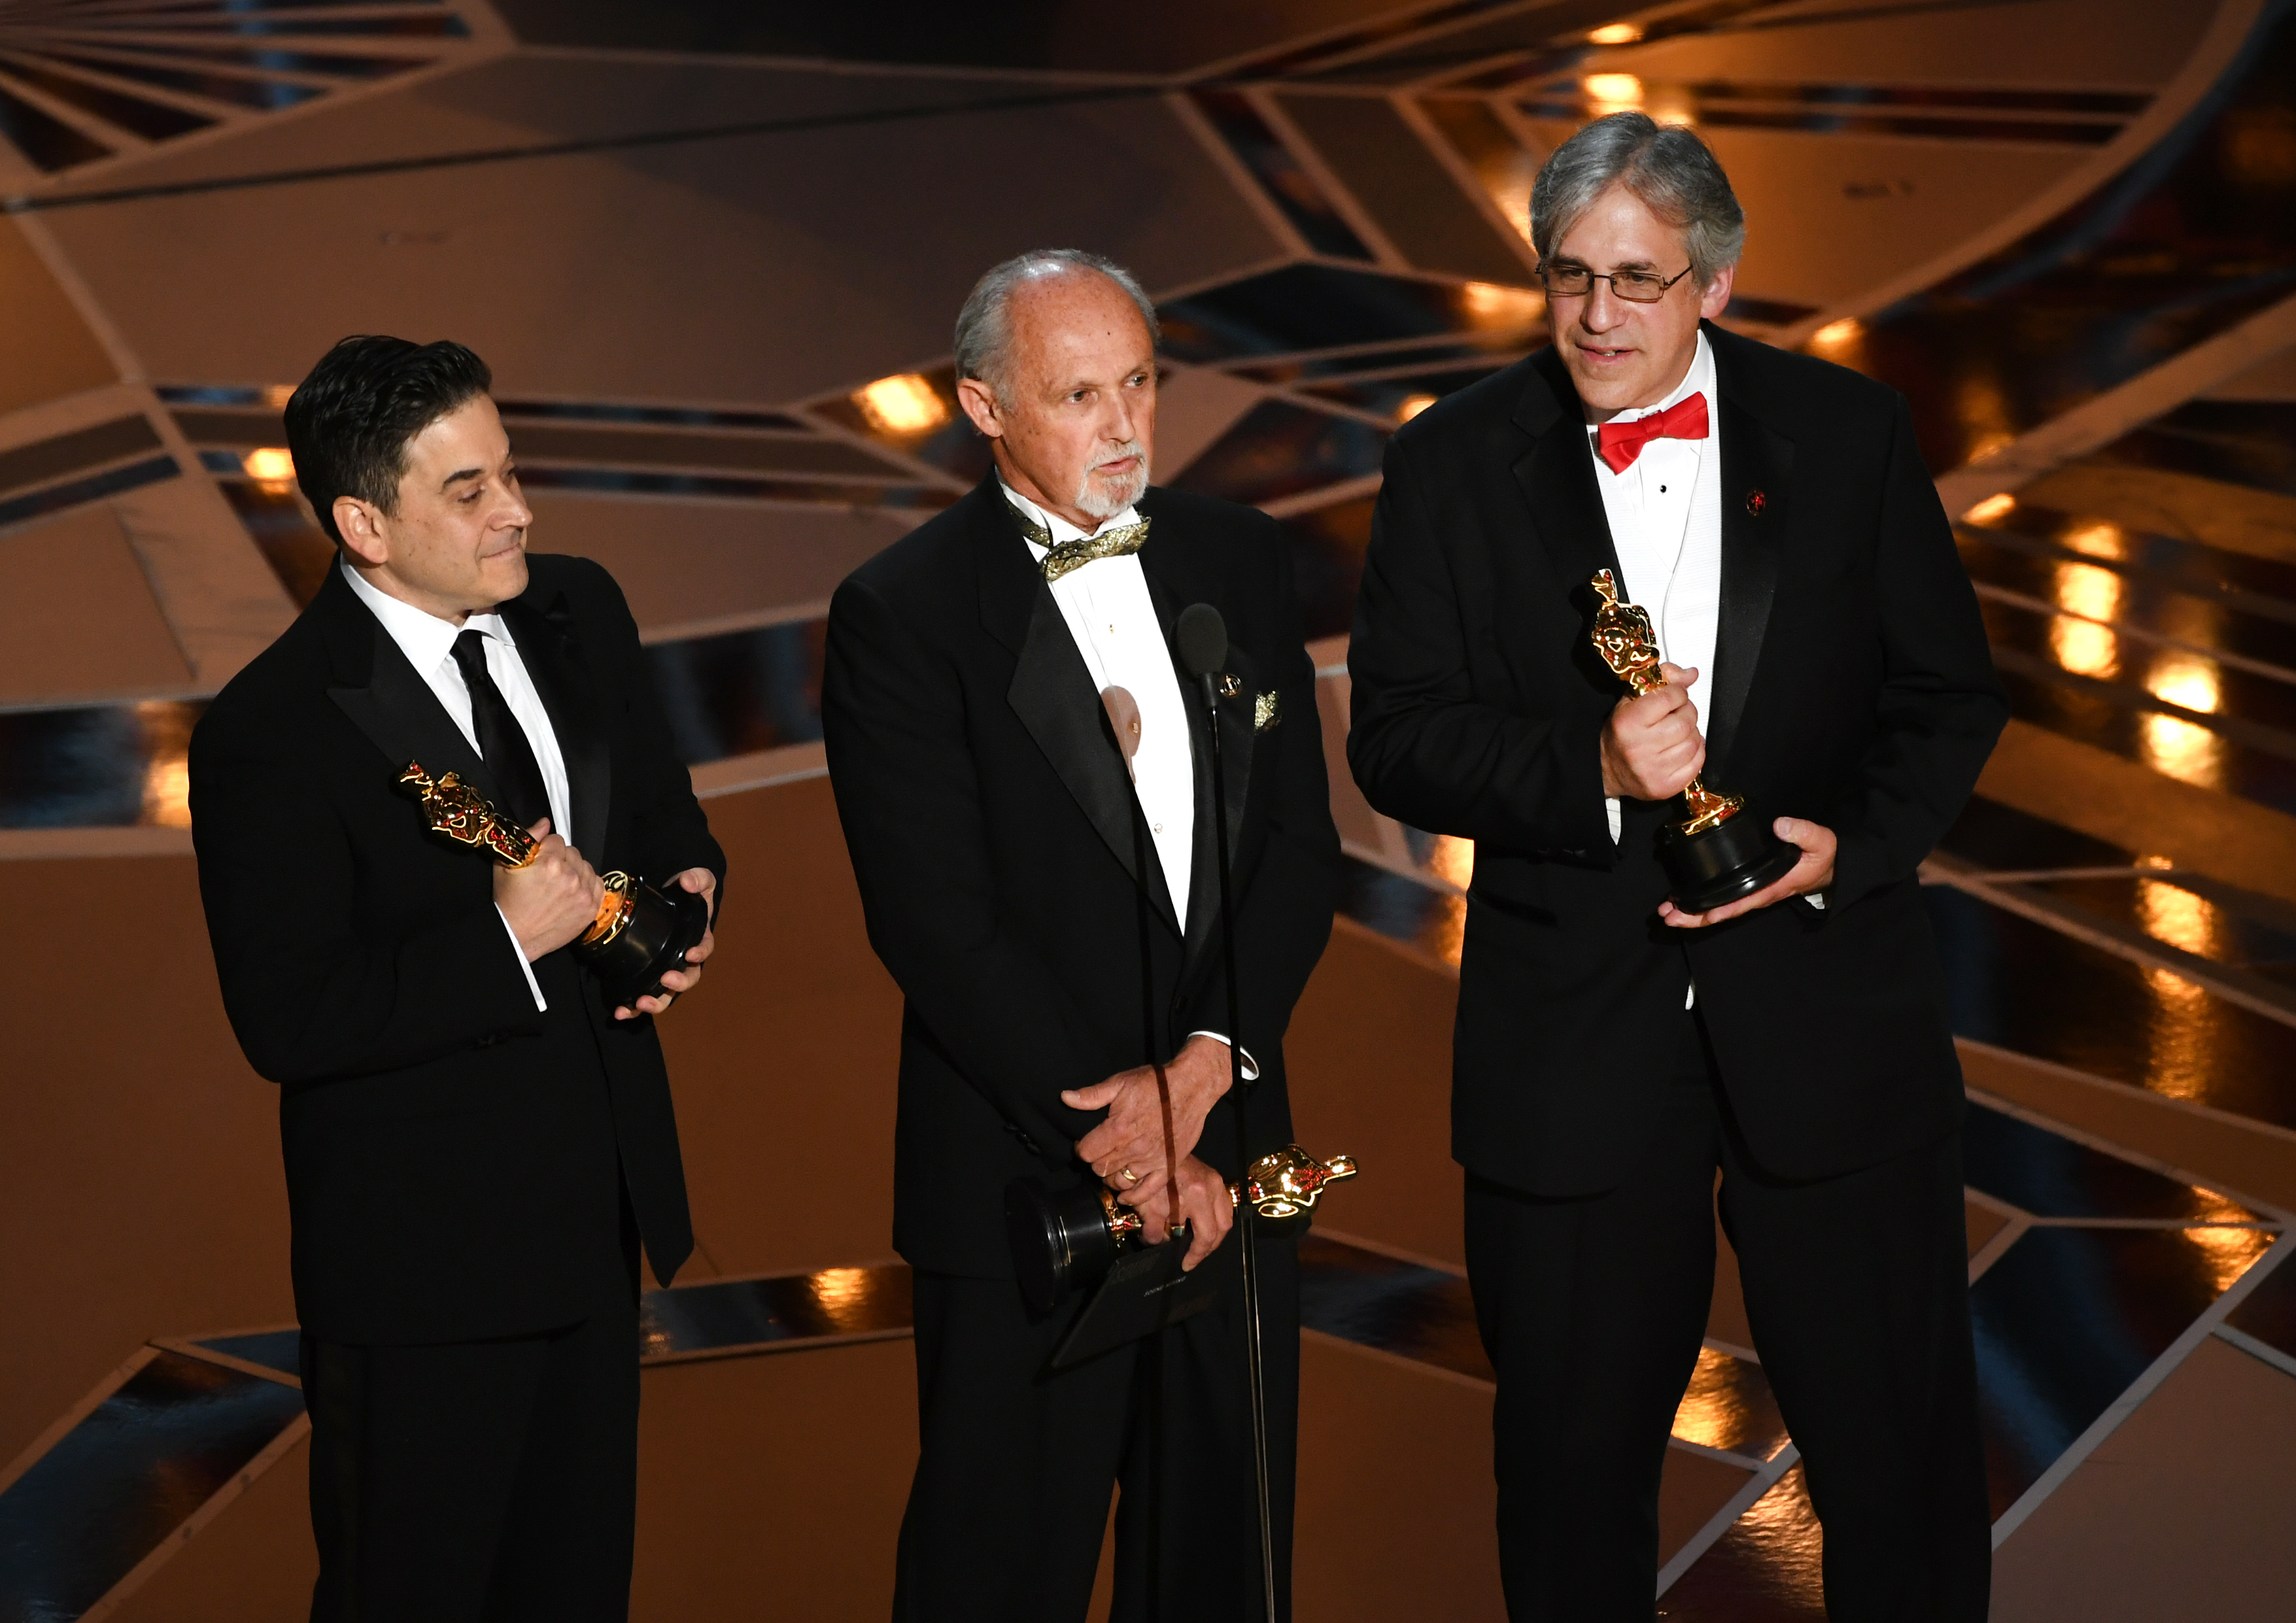 Sound mixers Gary A. Rizzo, Gregg Landaker and Mark Weingarten accept Best Sound Mixing for 'Dunkirk' onstage during the 90th Annual Academy Awards at the Dolby Theatre at Hollywood &amp; Highland Center on March 4, 2018 in Hollywood. (Kevin Winter—Getty Images)